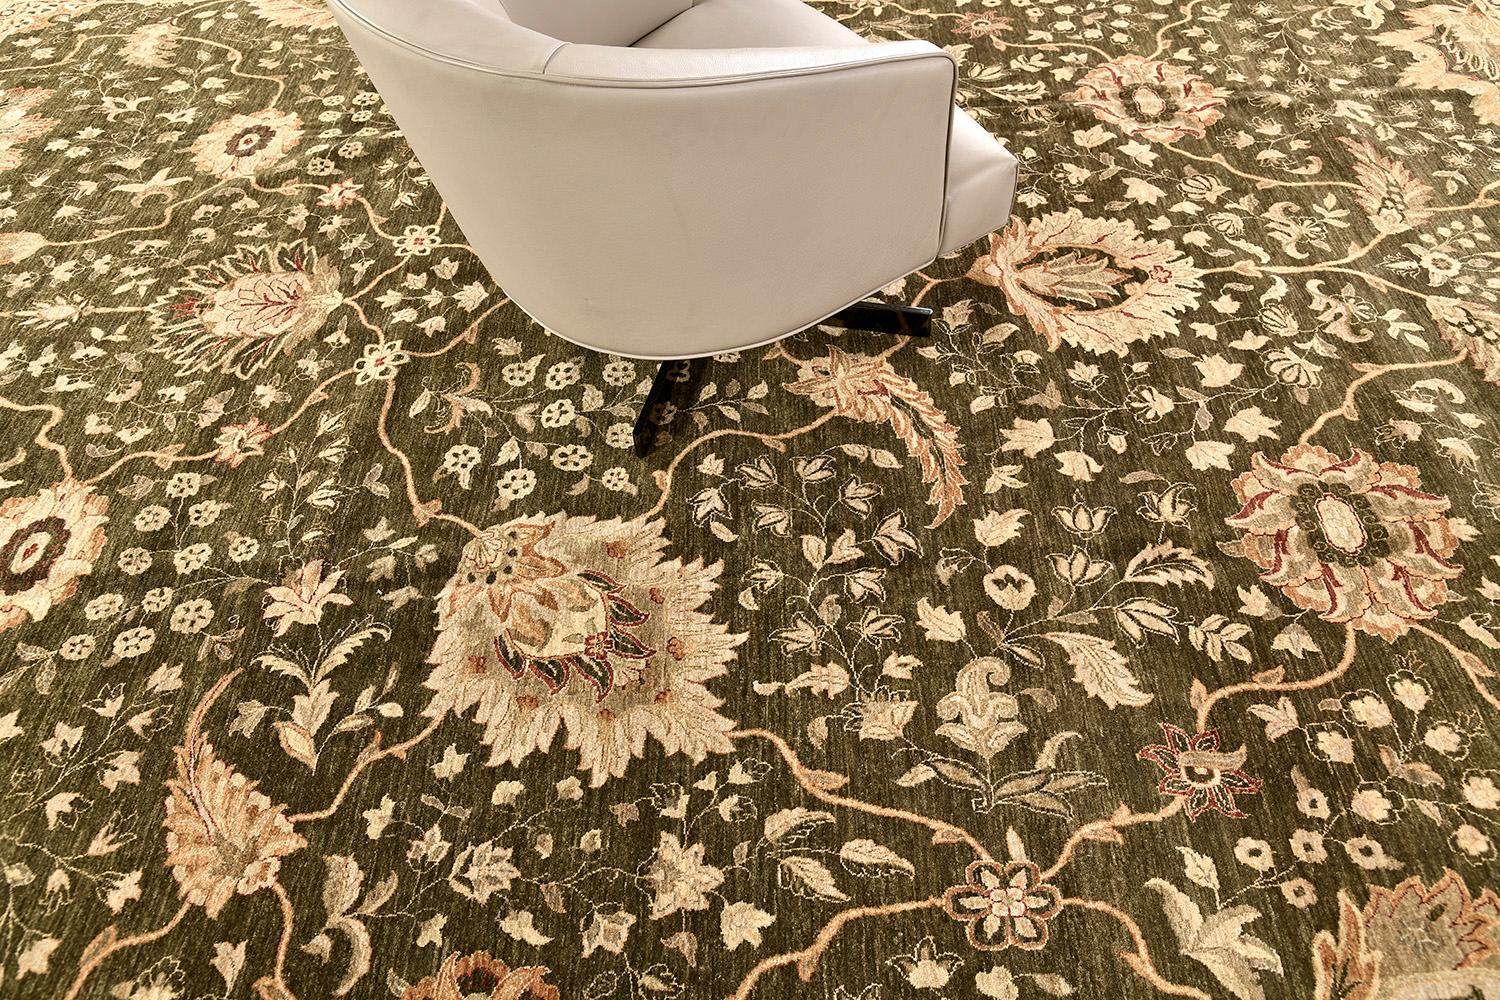 This stylish revival of Ottoman rug has a mirrored pattern of elegant floral scrolls and vine-formed motifs of gold, black, and tans with symmetrical motifs of borderlines. This masterwork of art utilizes earthy and clay tones to create a warm and